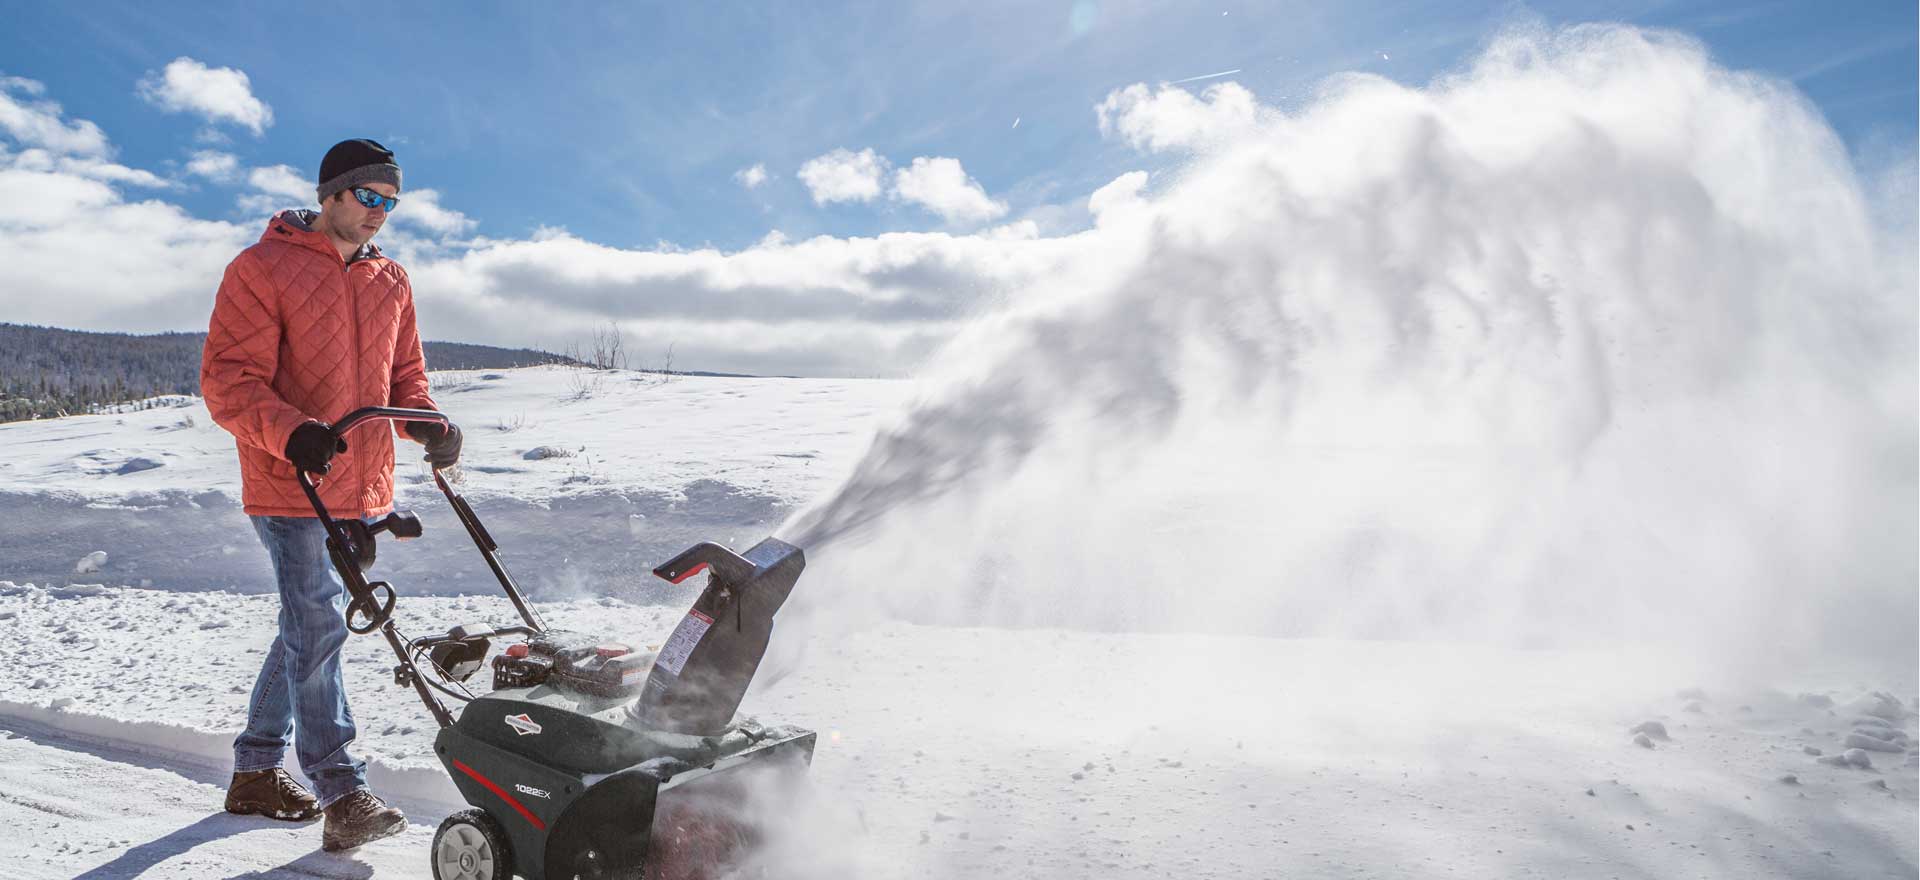 8 Best Two-Stage Snow Blowers to Save You the Shoveling Energy (2023)